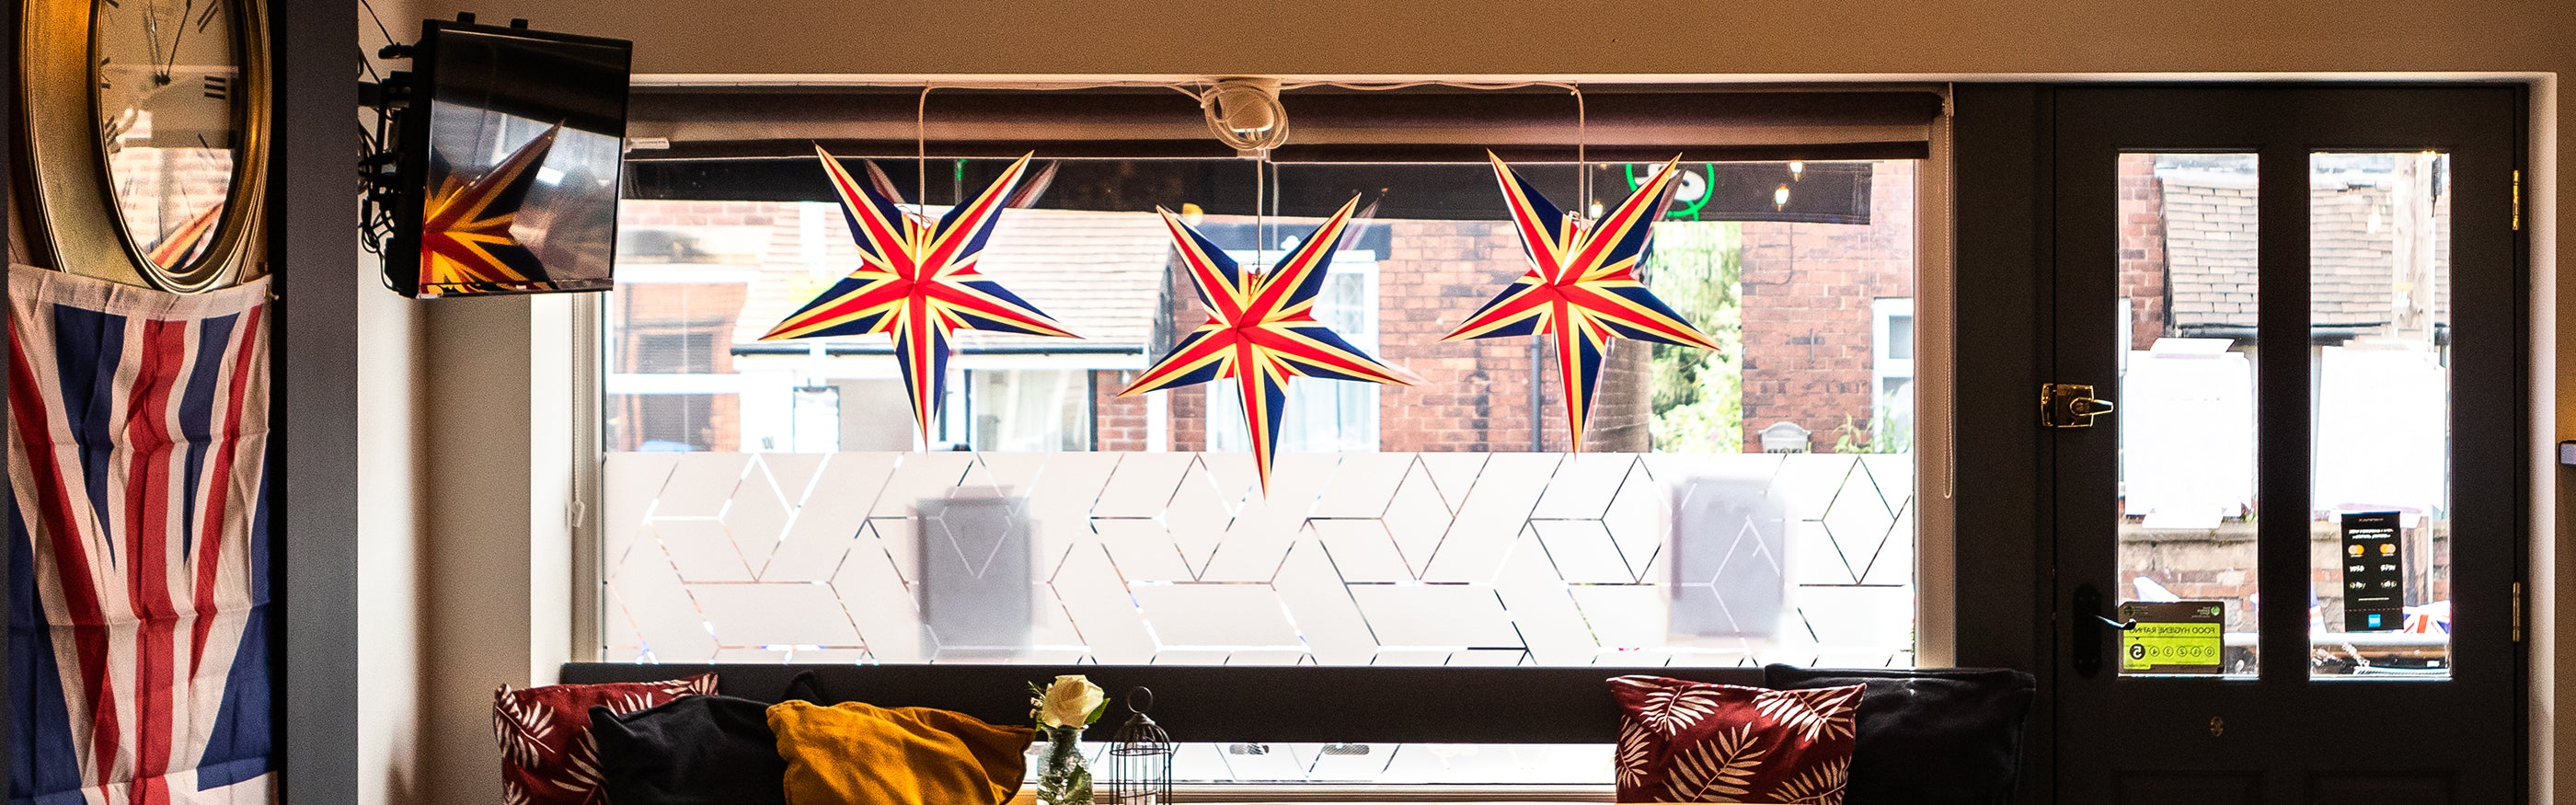 Examples of Jubilee Shop Displays that'll Turn Heads